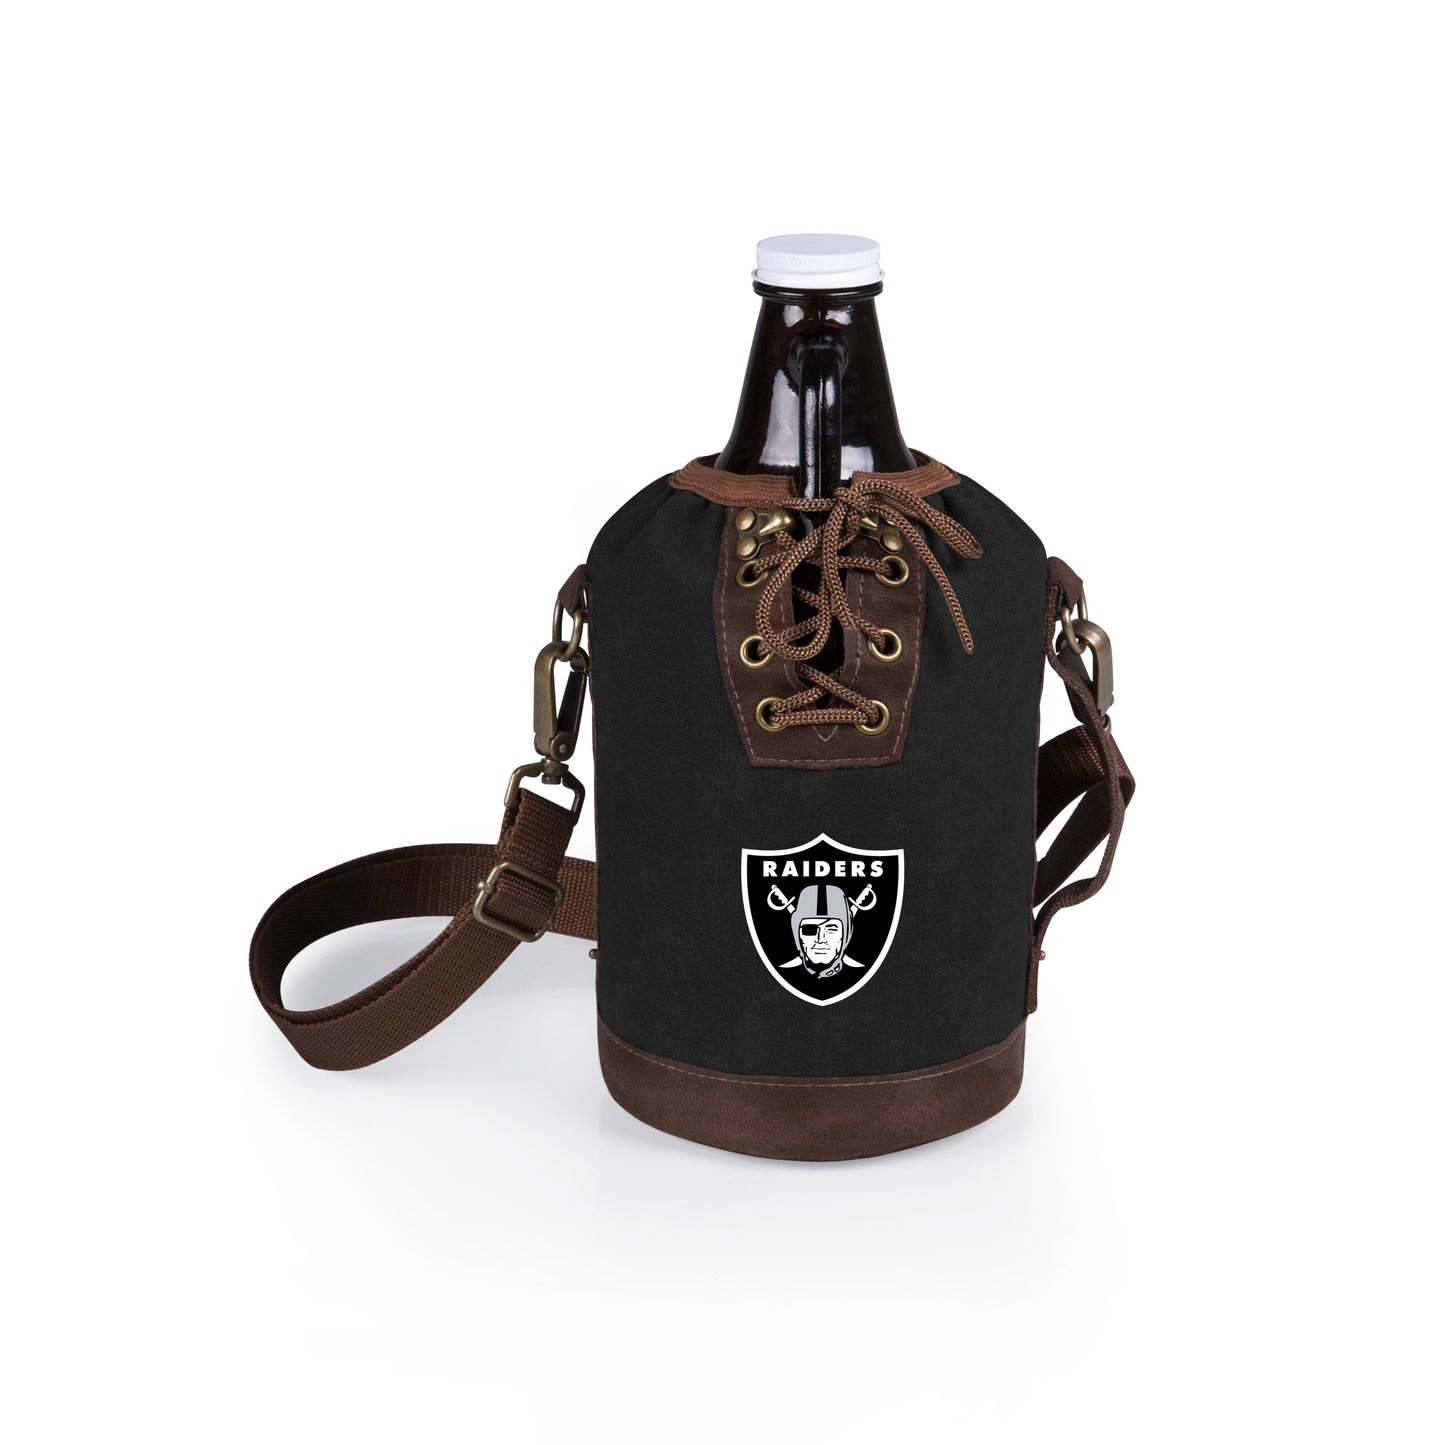 Las Vegas Raiders Insulated Growler Tote with 64 oz. Glass Growler, (Black with Brown Accents & Glass Growler)